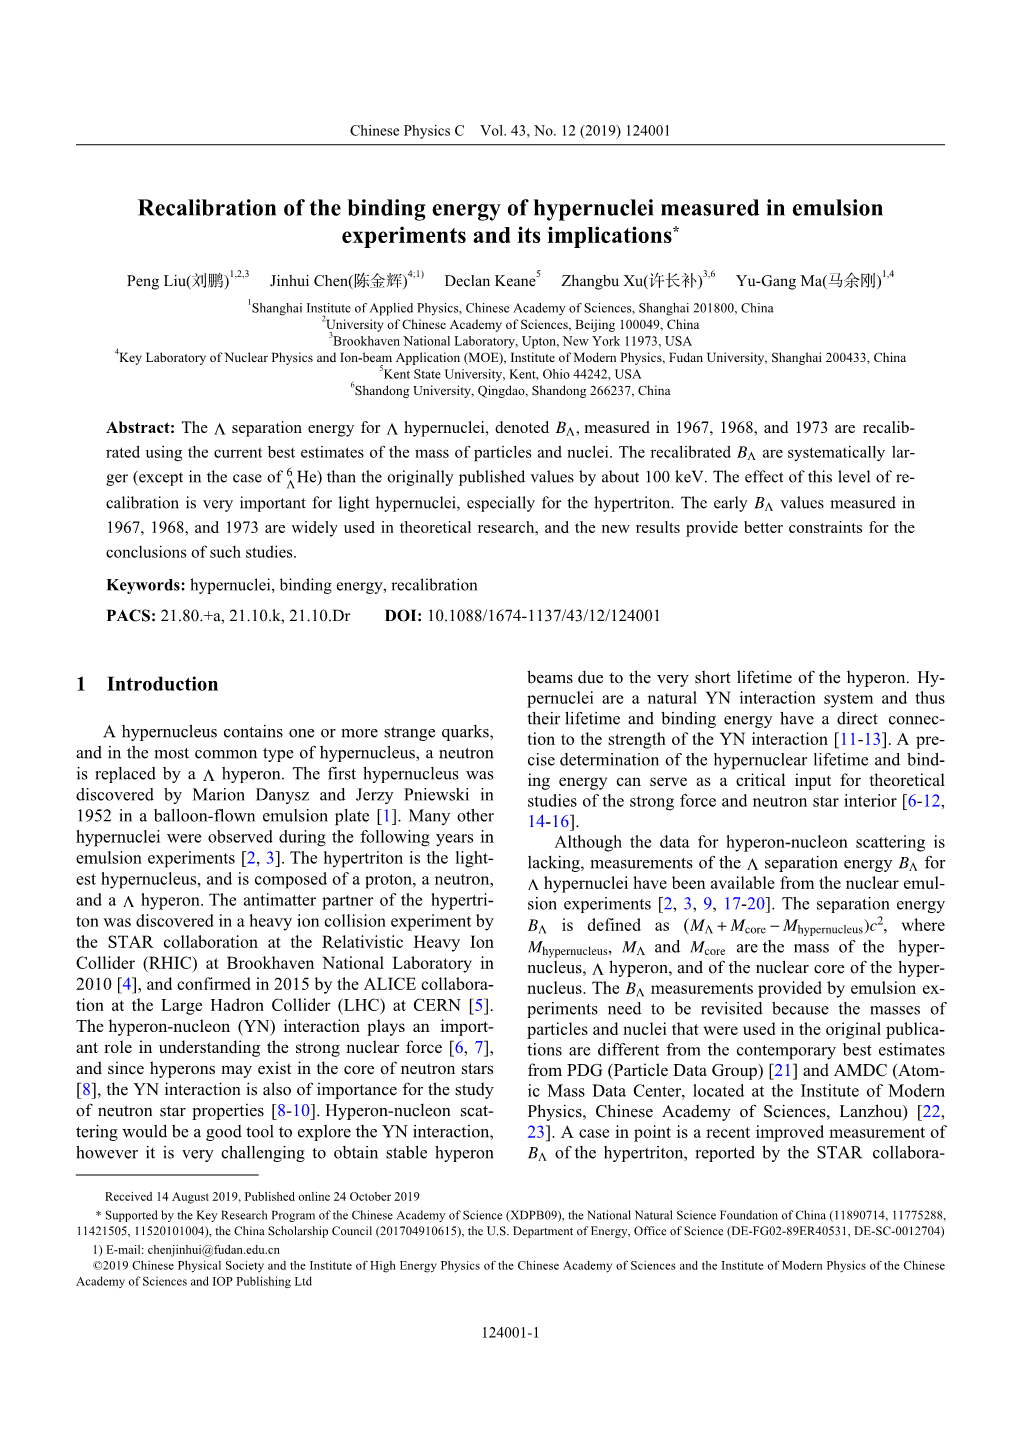 Recalibration of the Binding Energy of Hypernuclei Measured in Emulsion Experiments and Its Implications*